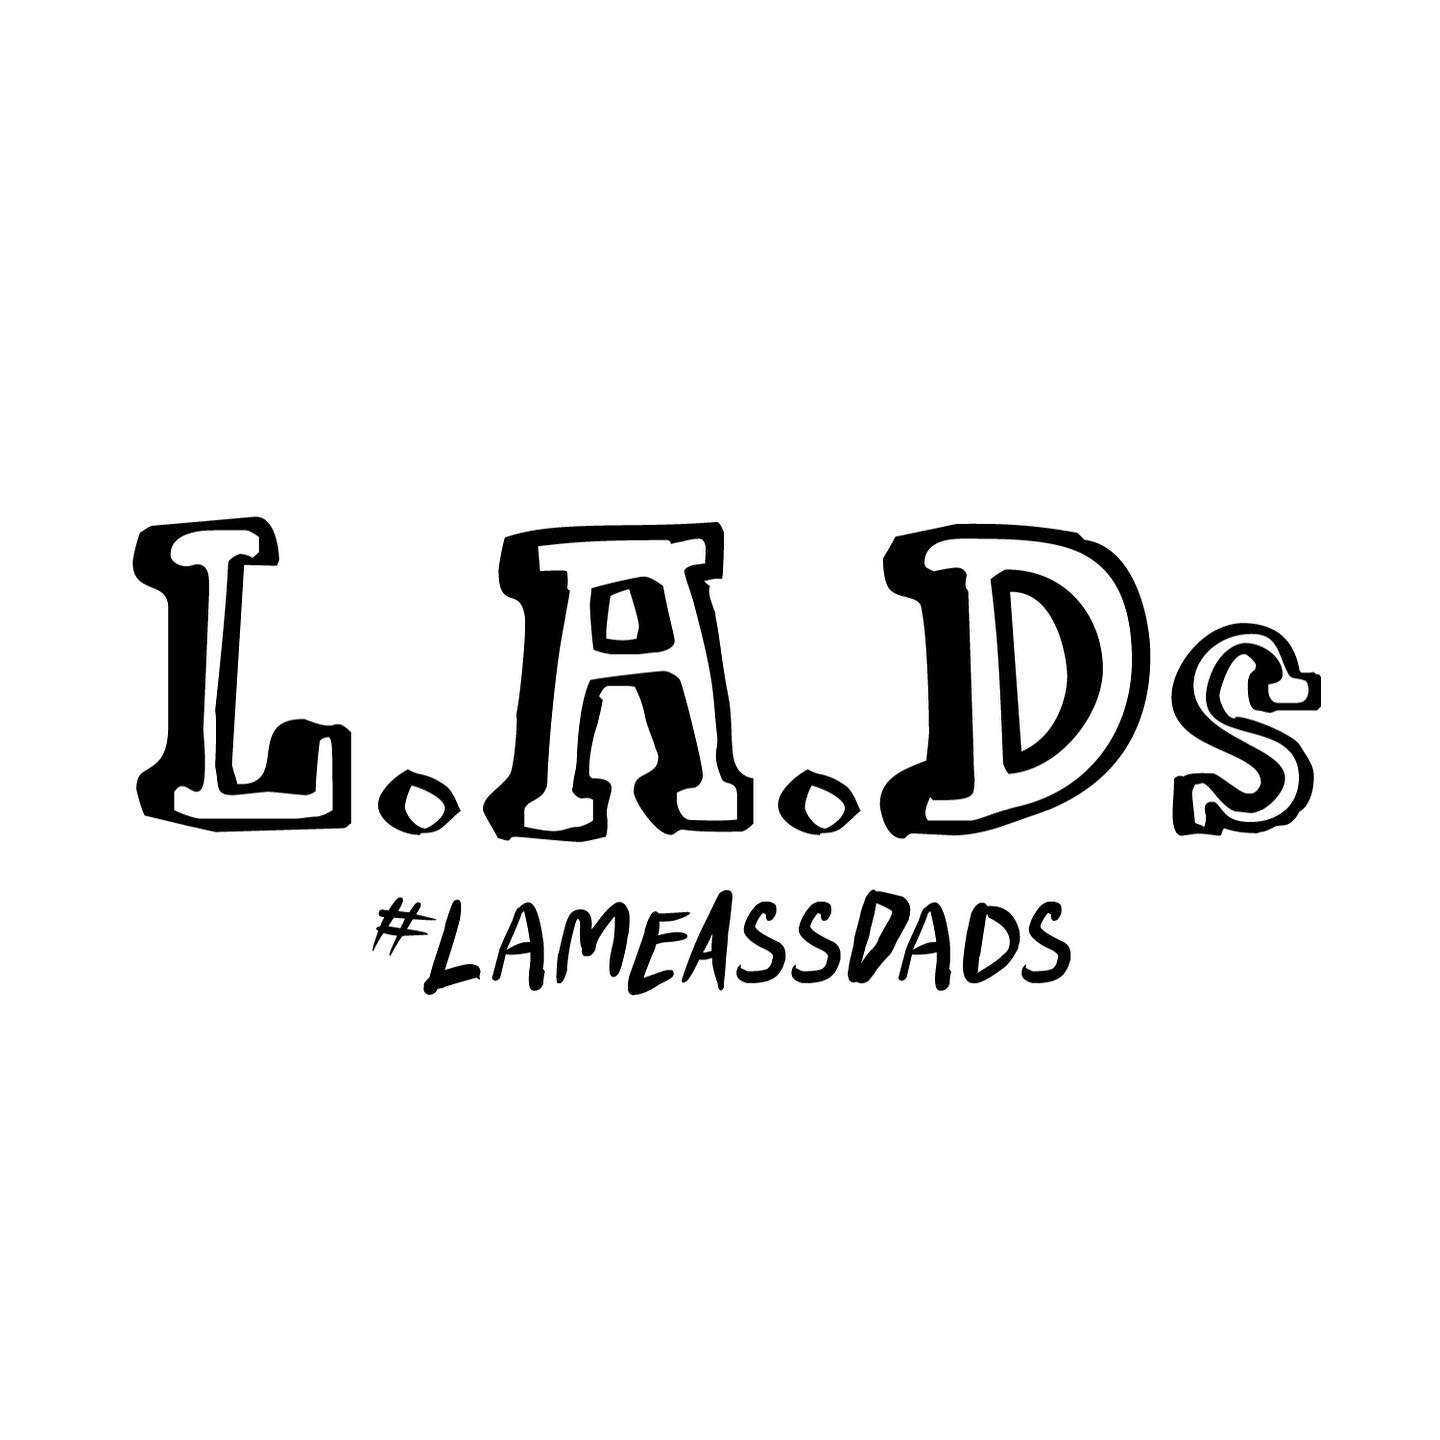 Presenting the final LADs logo for your viewing pleasure! A BIG thank you to the @lameassdads for letting me design y&rsquo;all a not so lame logo 😀🤘🏻
:
:
#lunalilydesigns #logodesigner #logodesign #logodesigns #branding #marketing #ohiopunk #ohio